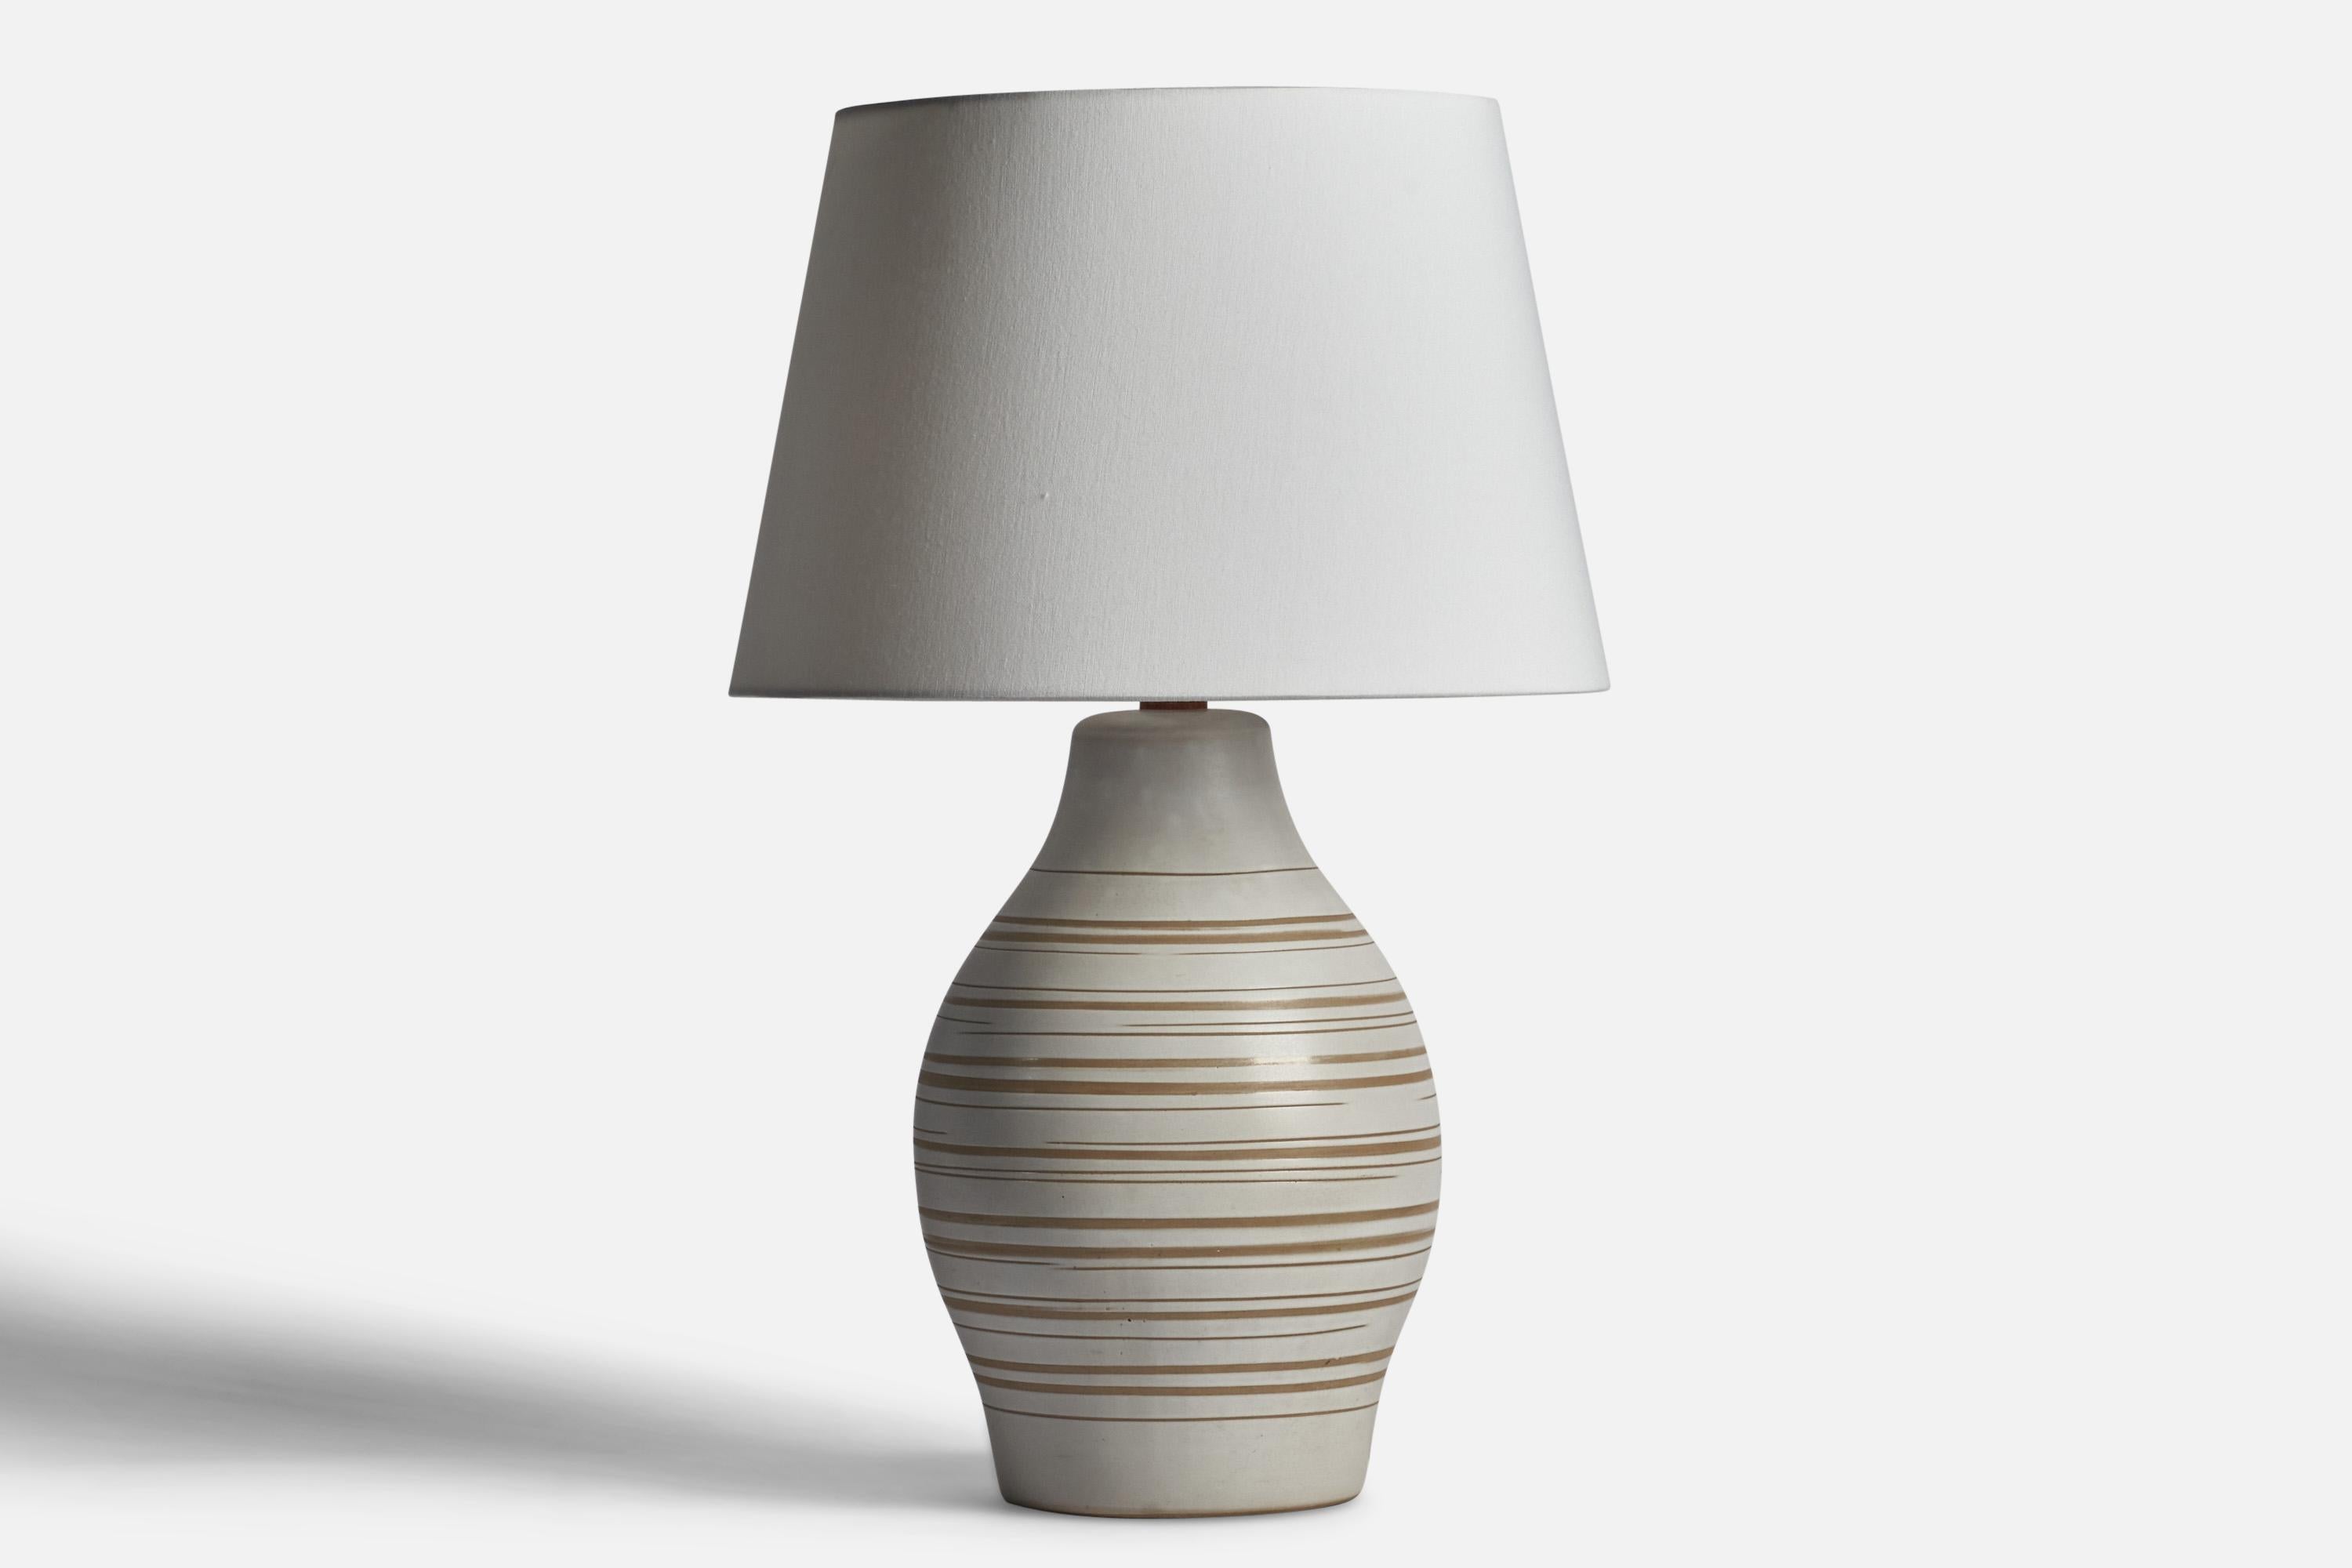 A beige and light grey-glazed ceramic and walnut table lamp designed by Jane & Gordon Martz and produced by Marshall Studios, USA, 1960s.

Dimensions of Lamp (inches): 20.75” H x 9.5” Diameter
Dimensions of Shade (inches): 12” Top Diameter x 16”